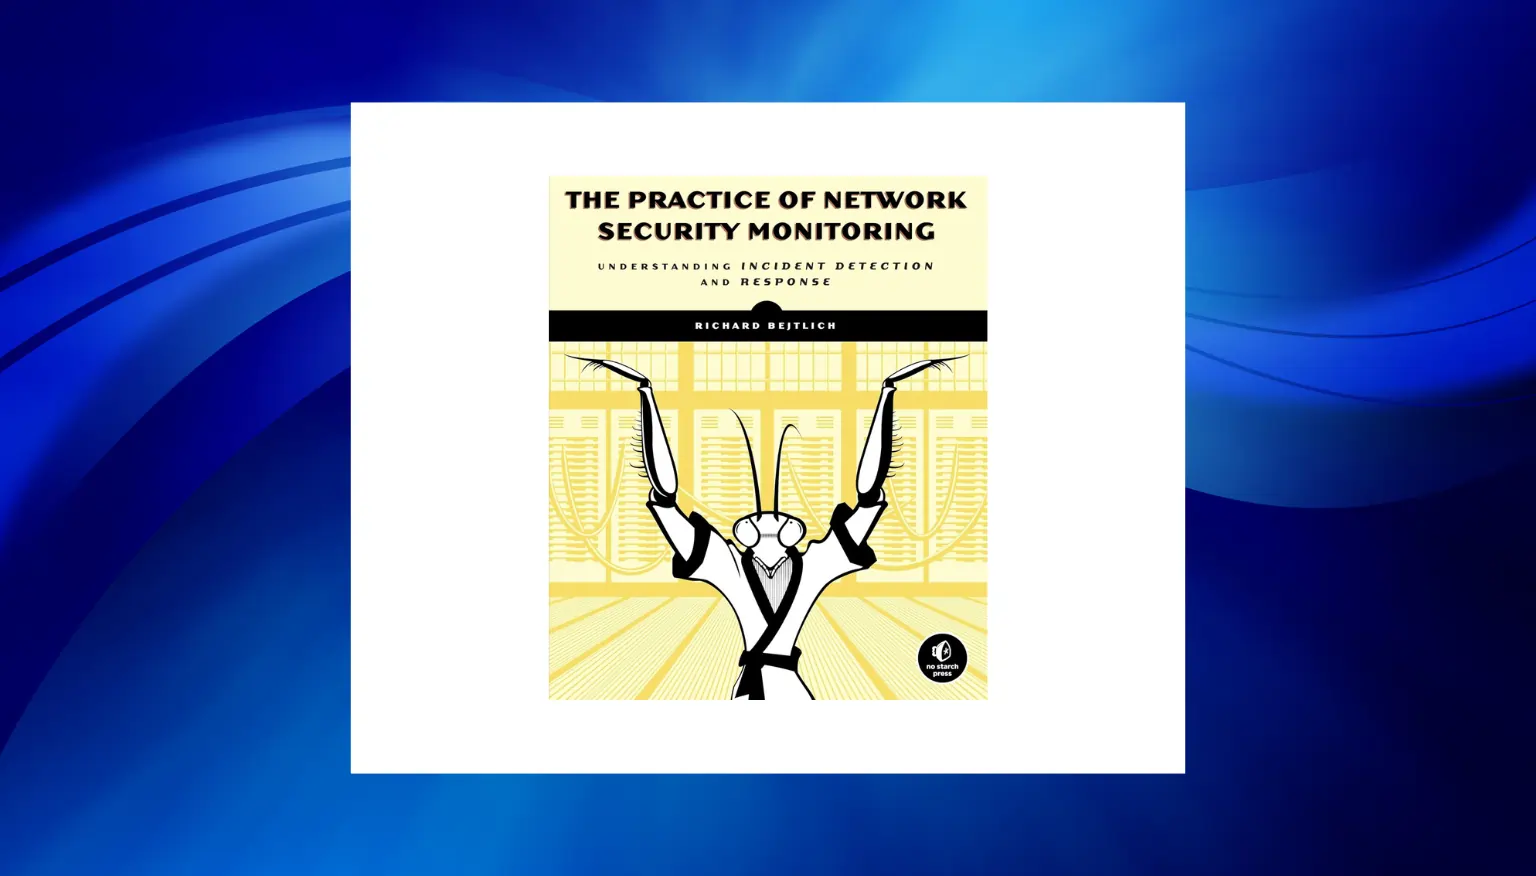 best books on network security - The Practice of Network Security Monitoring by Richard Bejtlich